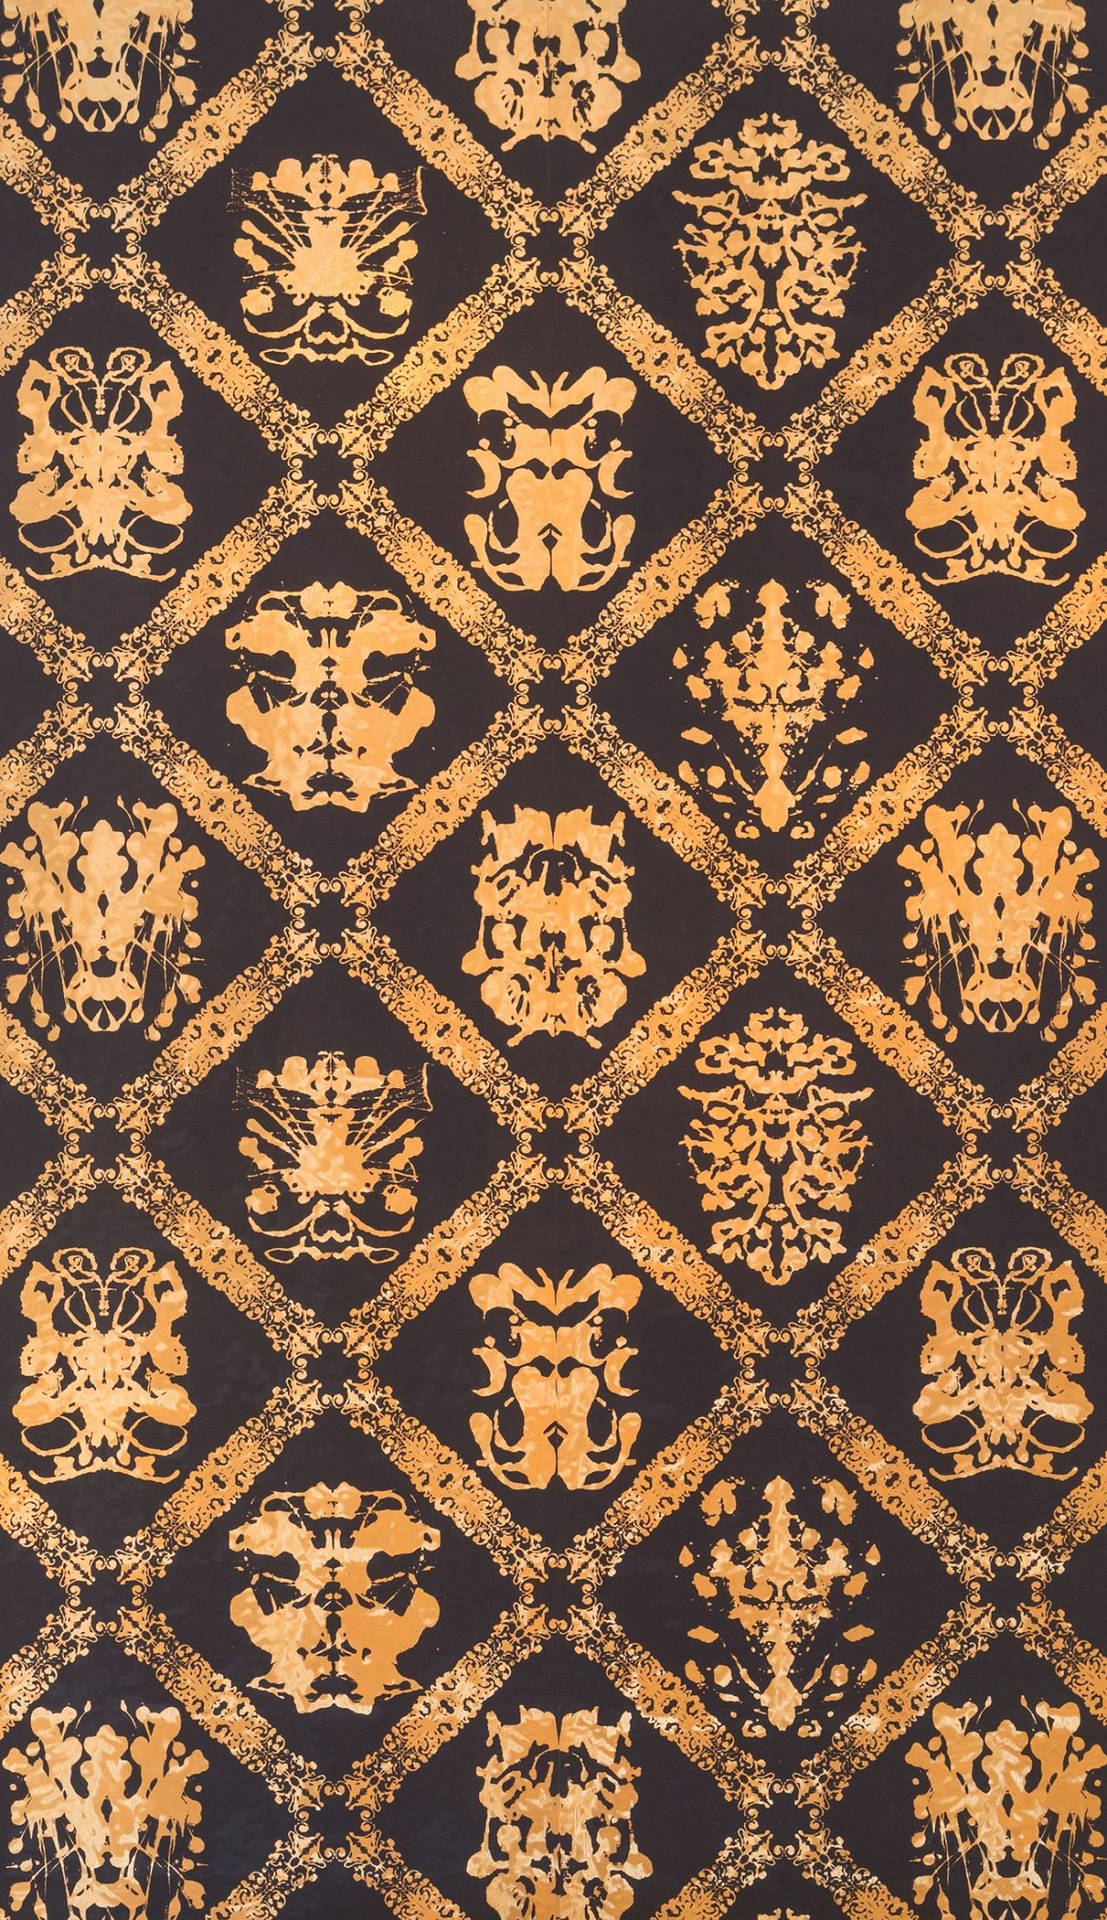 Gold Foil With Rorschach Pattern